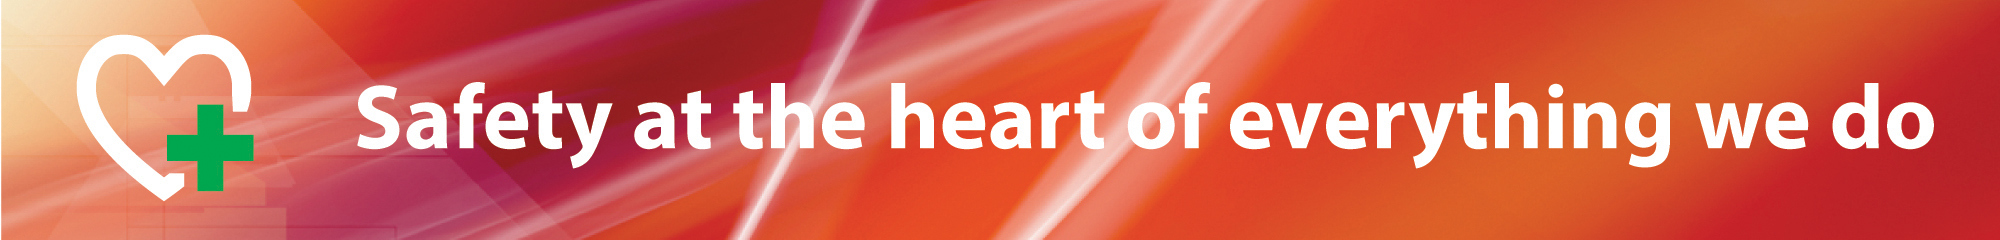 Safety at the heart of everything we do logo